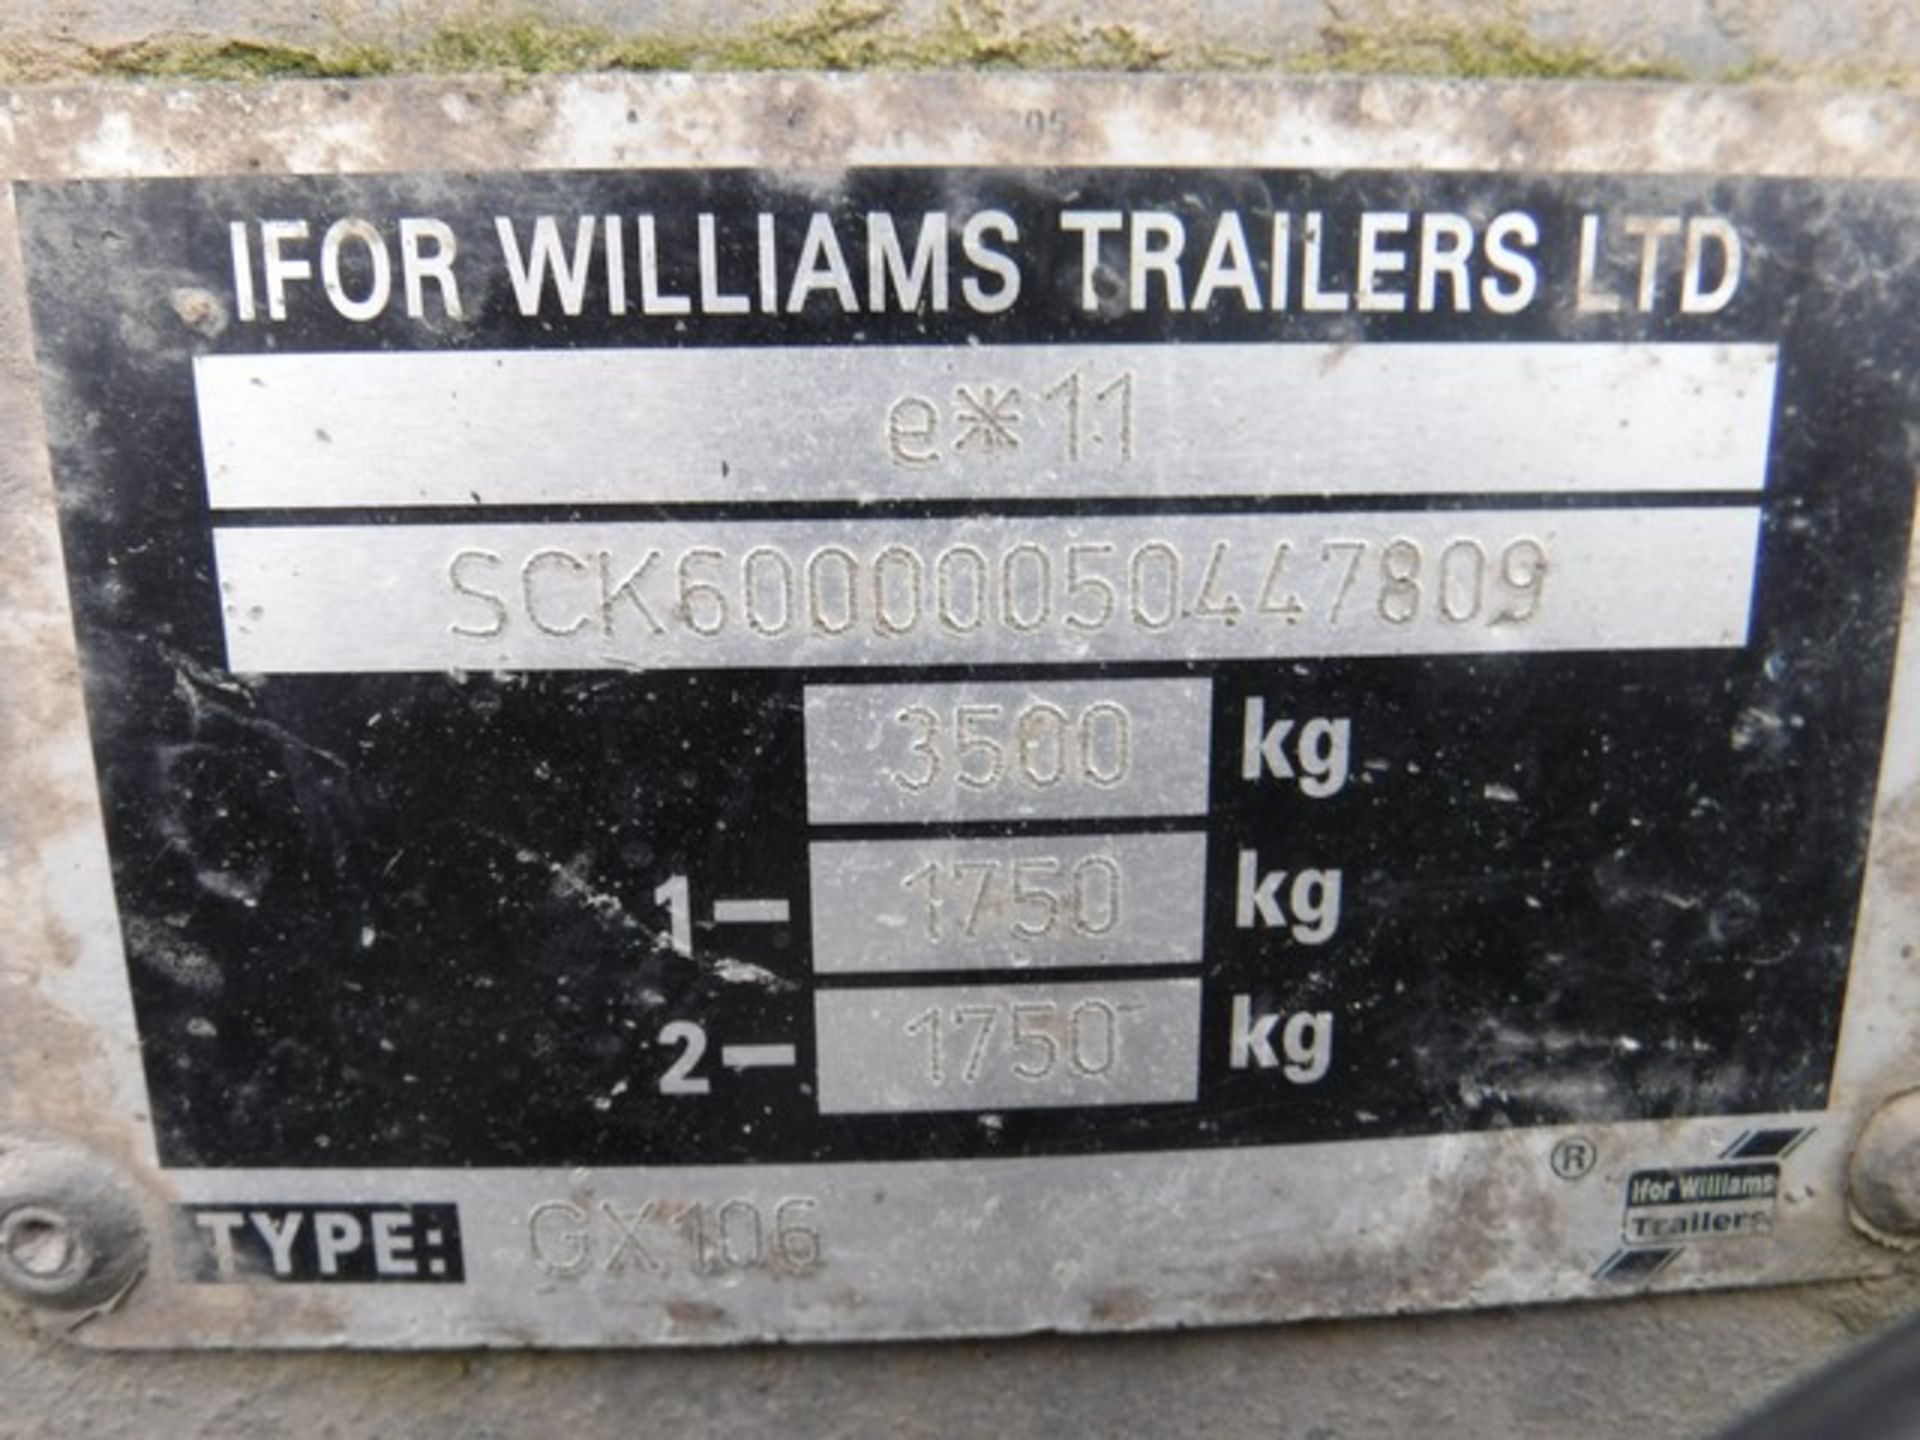 IFOR WILLIAMS 6' x 10' plant trailer GVW 3500kg s/n SCK60000050447809 - Image 4 of 4